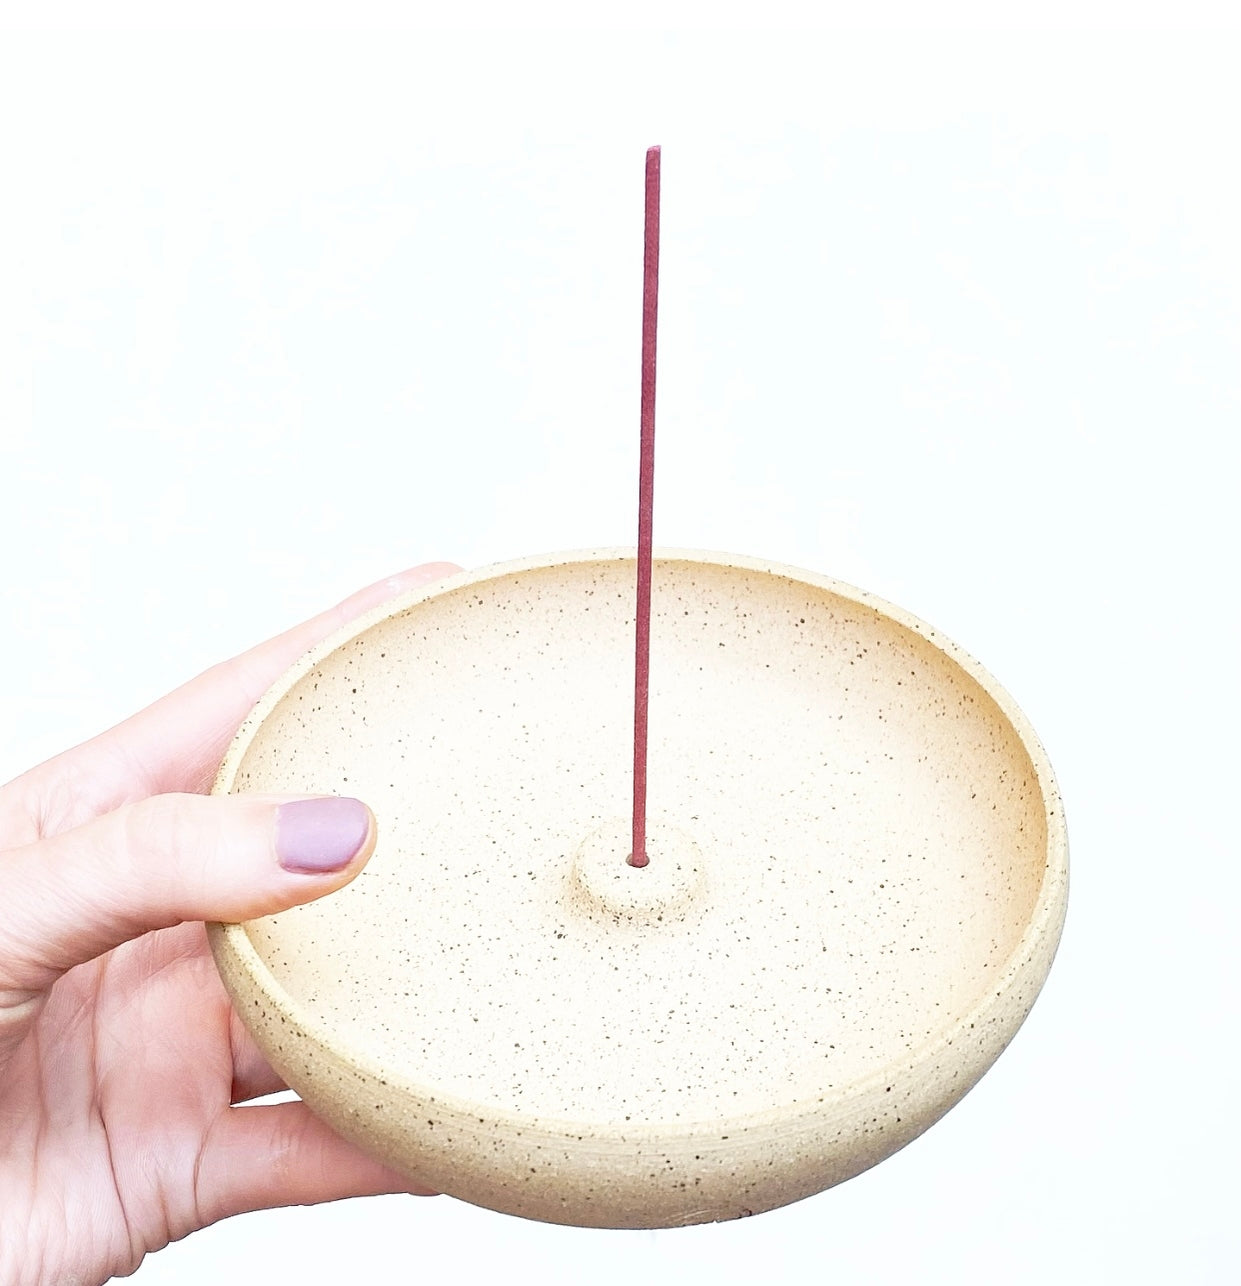 Hand thrown speckled stoneware incense holder, big enough to catch the ash. Crafted from buff stoneware & made in Virginia, USA by Korai Ceramics.